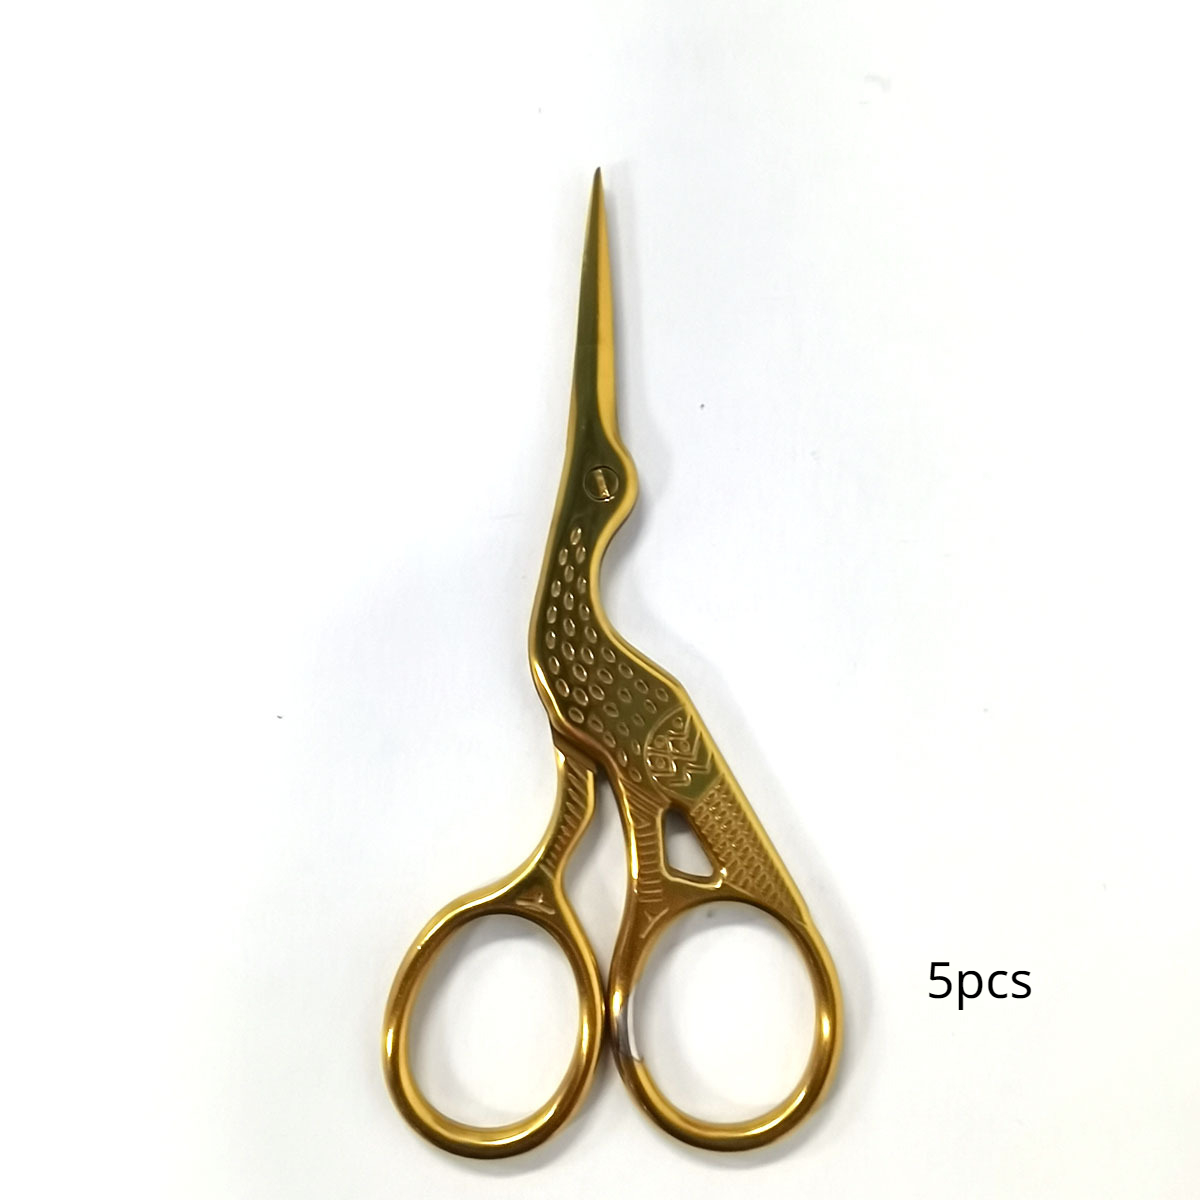 3 1/2 Multi Purpose Fancy Scissors Small Embroidery Gold Plated.